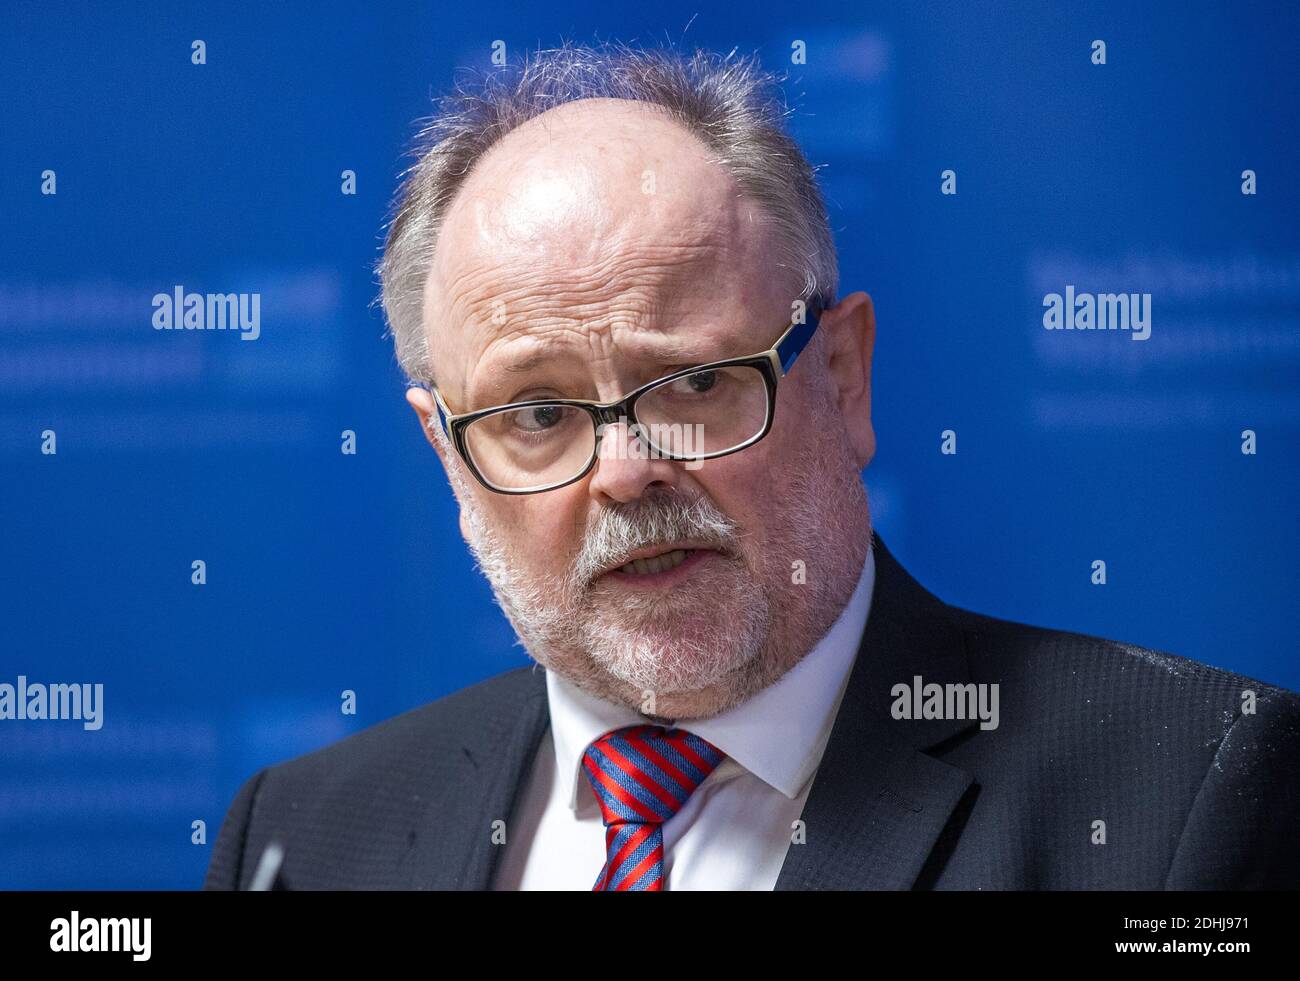 Schwerin, Germany. 12th Nov, 2020. Reinhard Müller, Head of the Department for the Protection of the Constitution, in the Ministry of the Interior of Mecklenburg-Vorpommern at a press conference to present the 2019 report on the protection of the constitution. Credit: Jens Büttner/dpa-Zentralbild/ZB/dpa/Alamy Live News Stock Photo